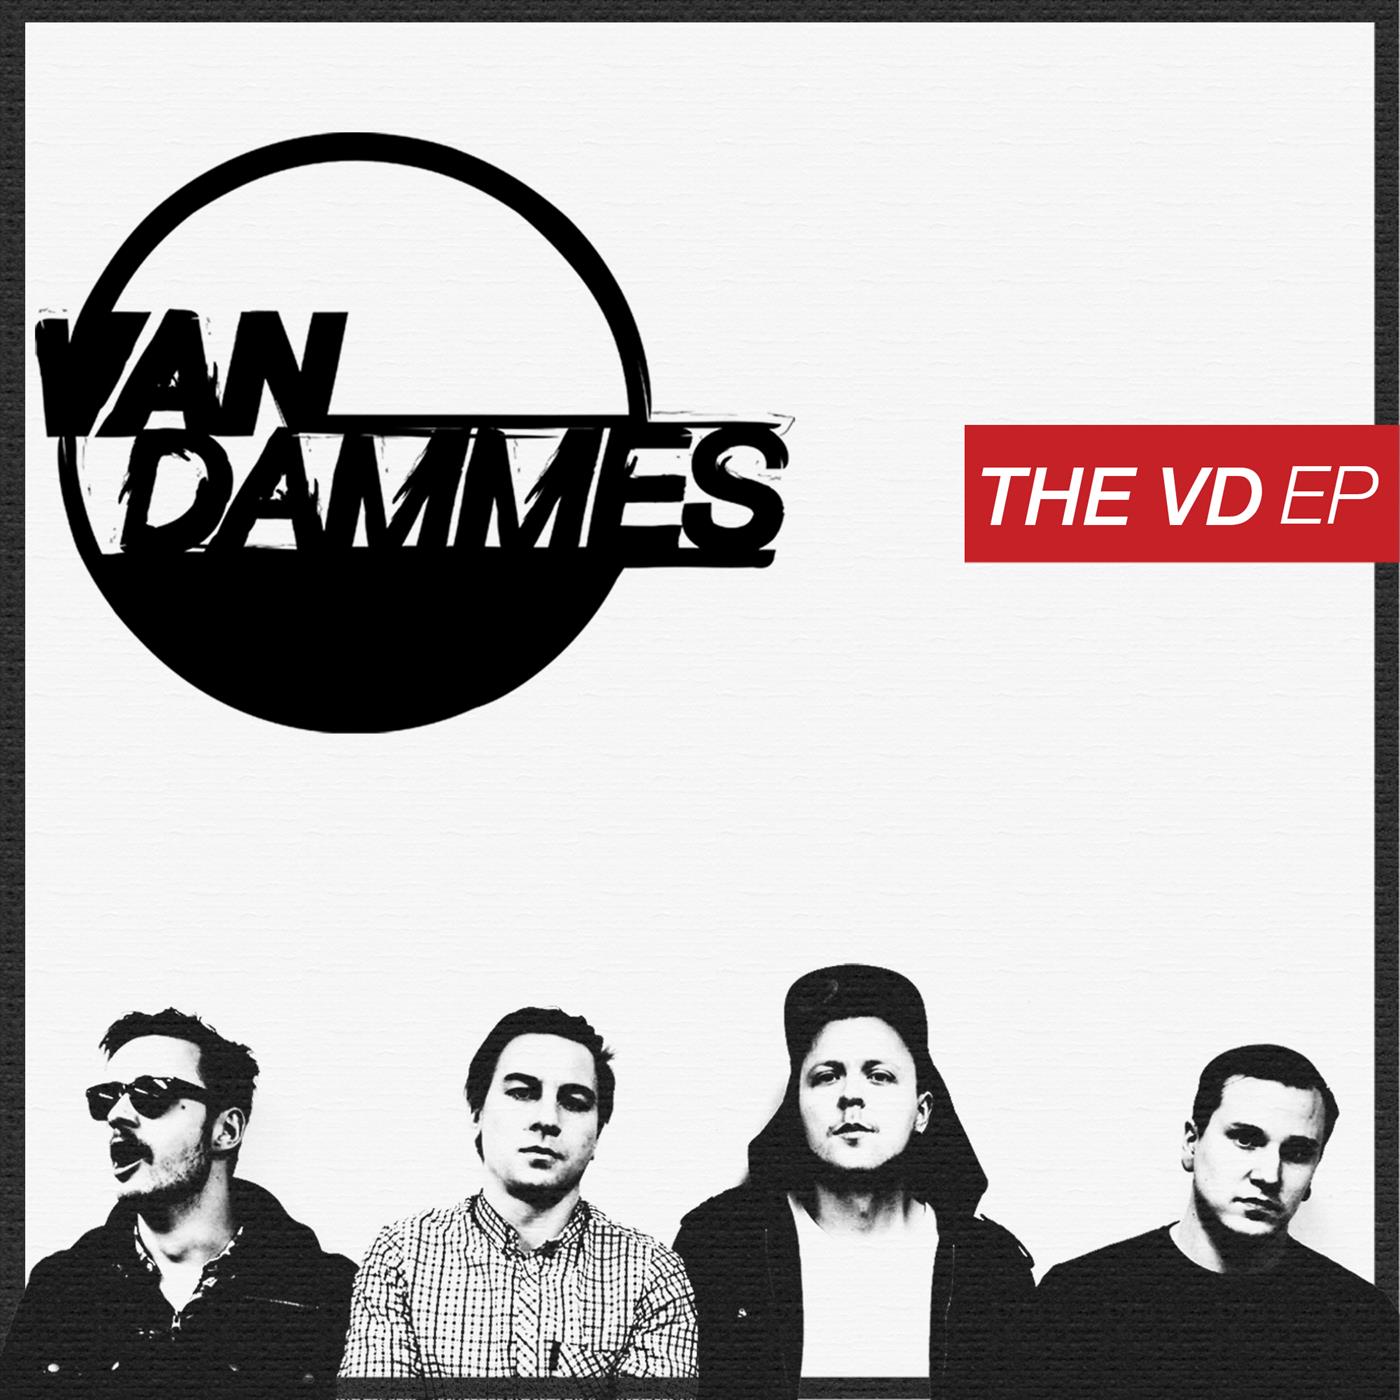 The VD EP